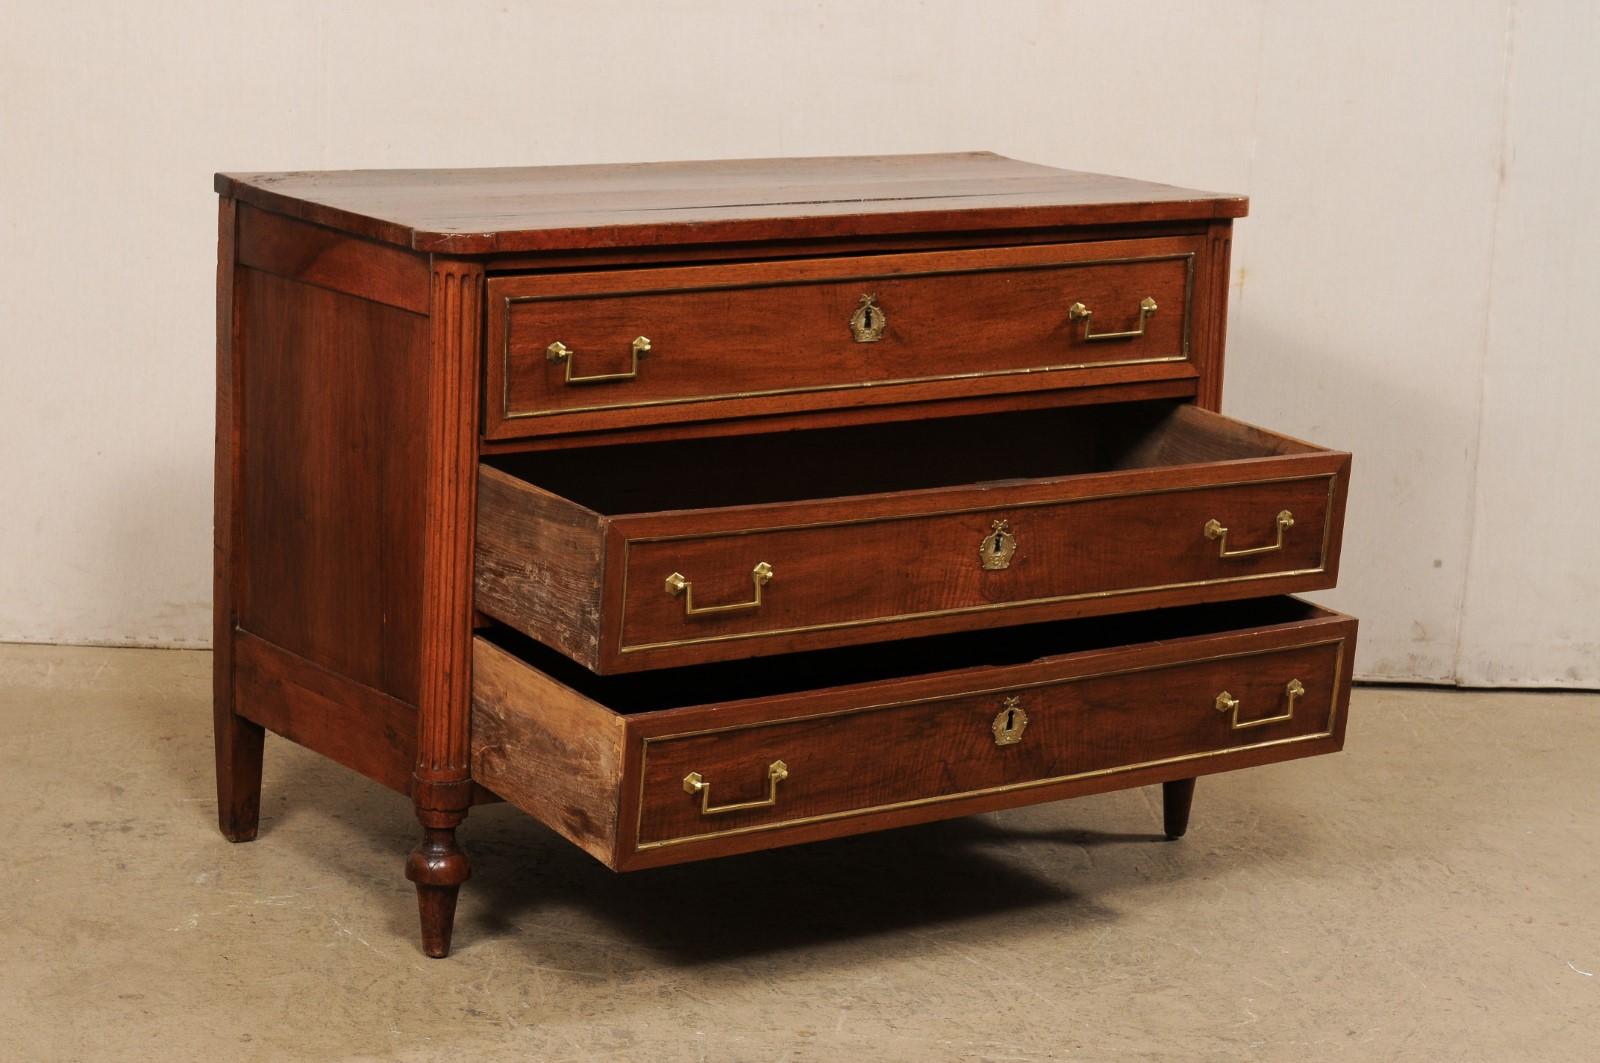 Neoclassical Neoclassic Period French Commode W/Hidden Butler's Secretary & Writing Desk For Sale